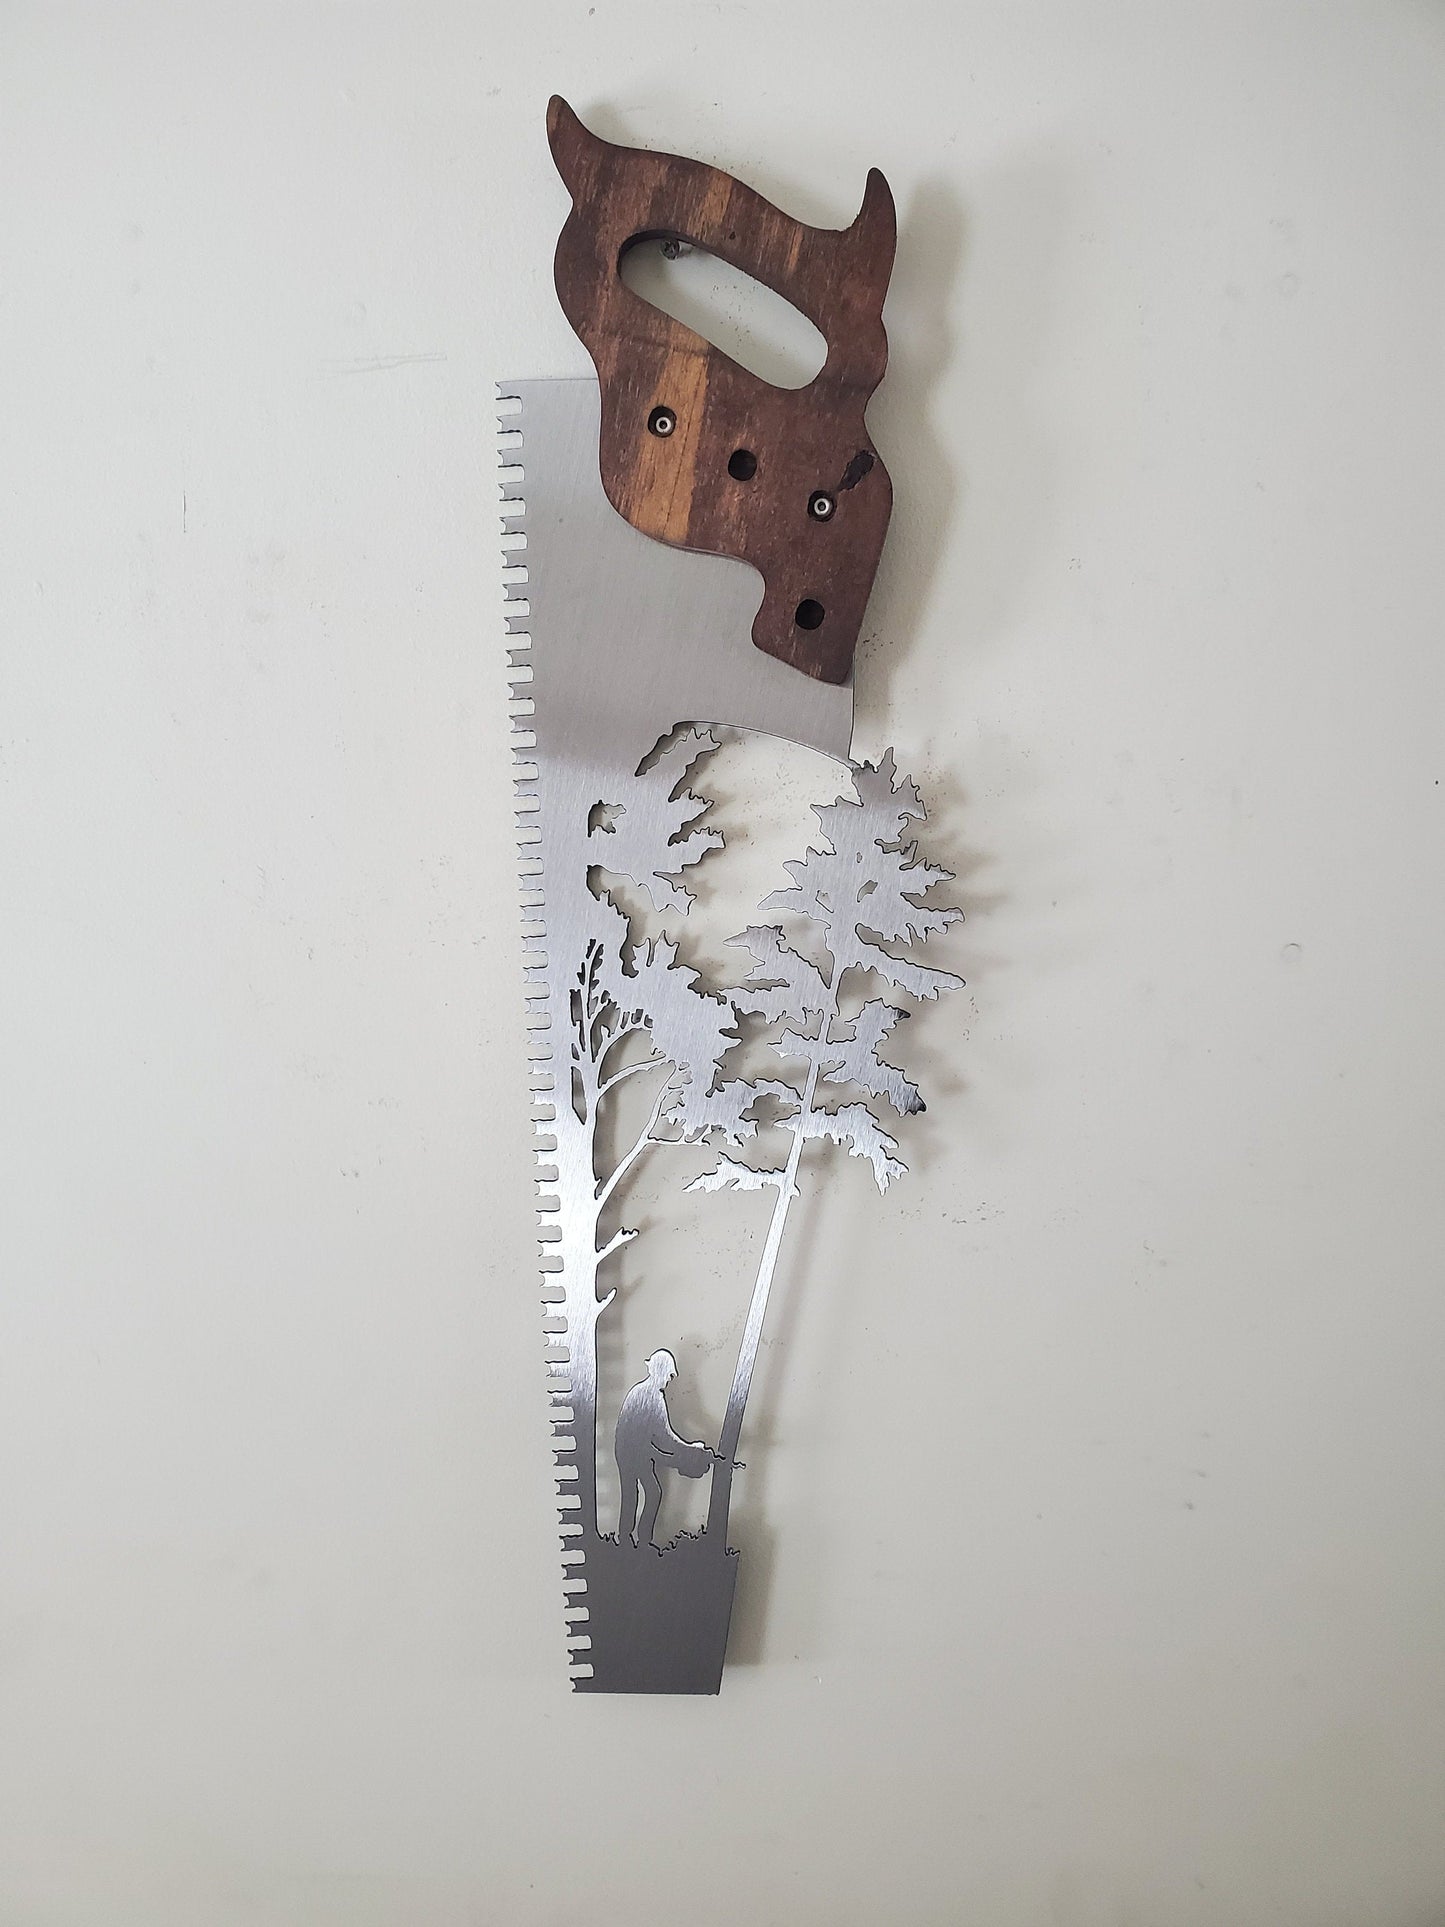 handsaw cut out with trees and lumberjack